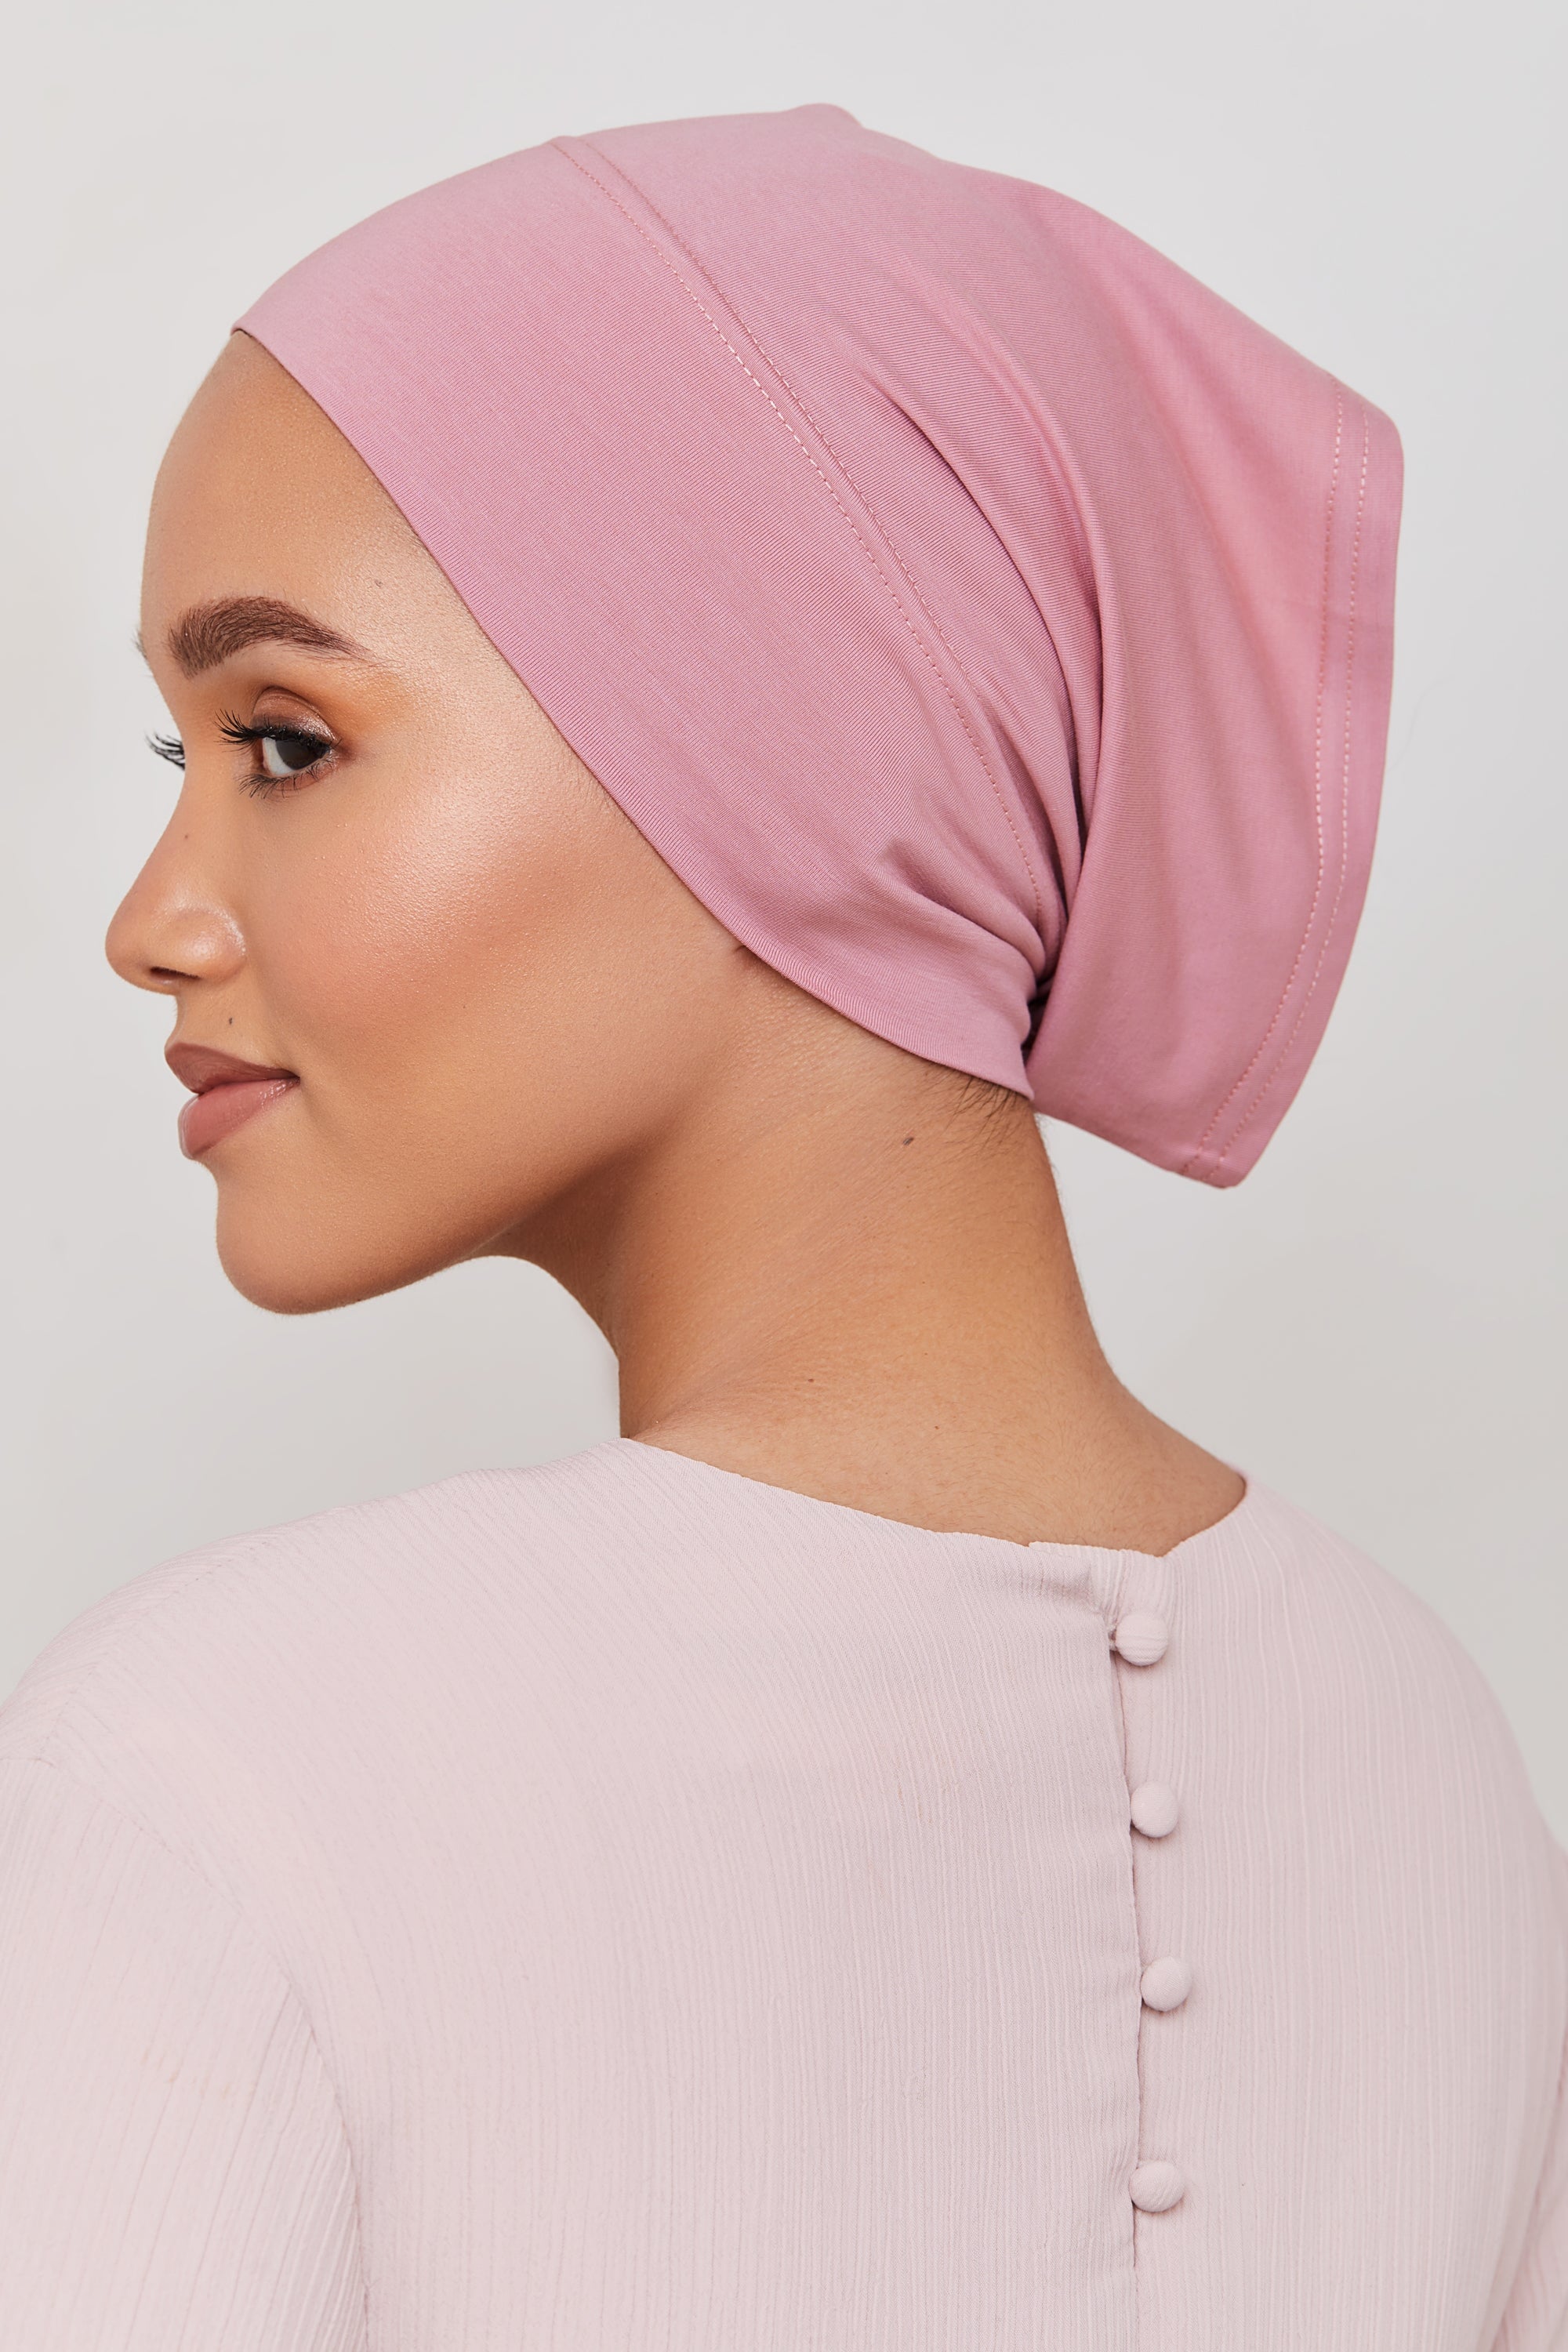 Cotton Undercap - Dusty Rose Veiled Collection 